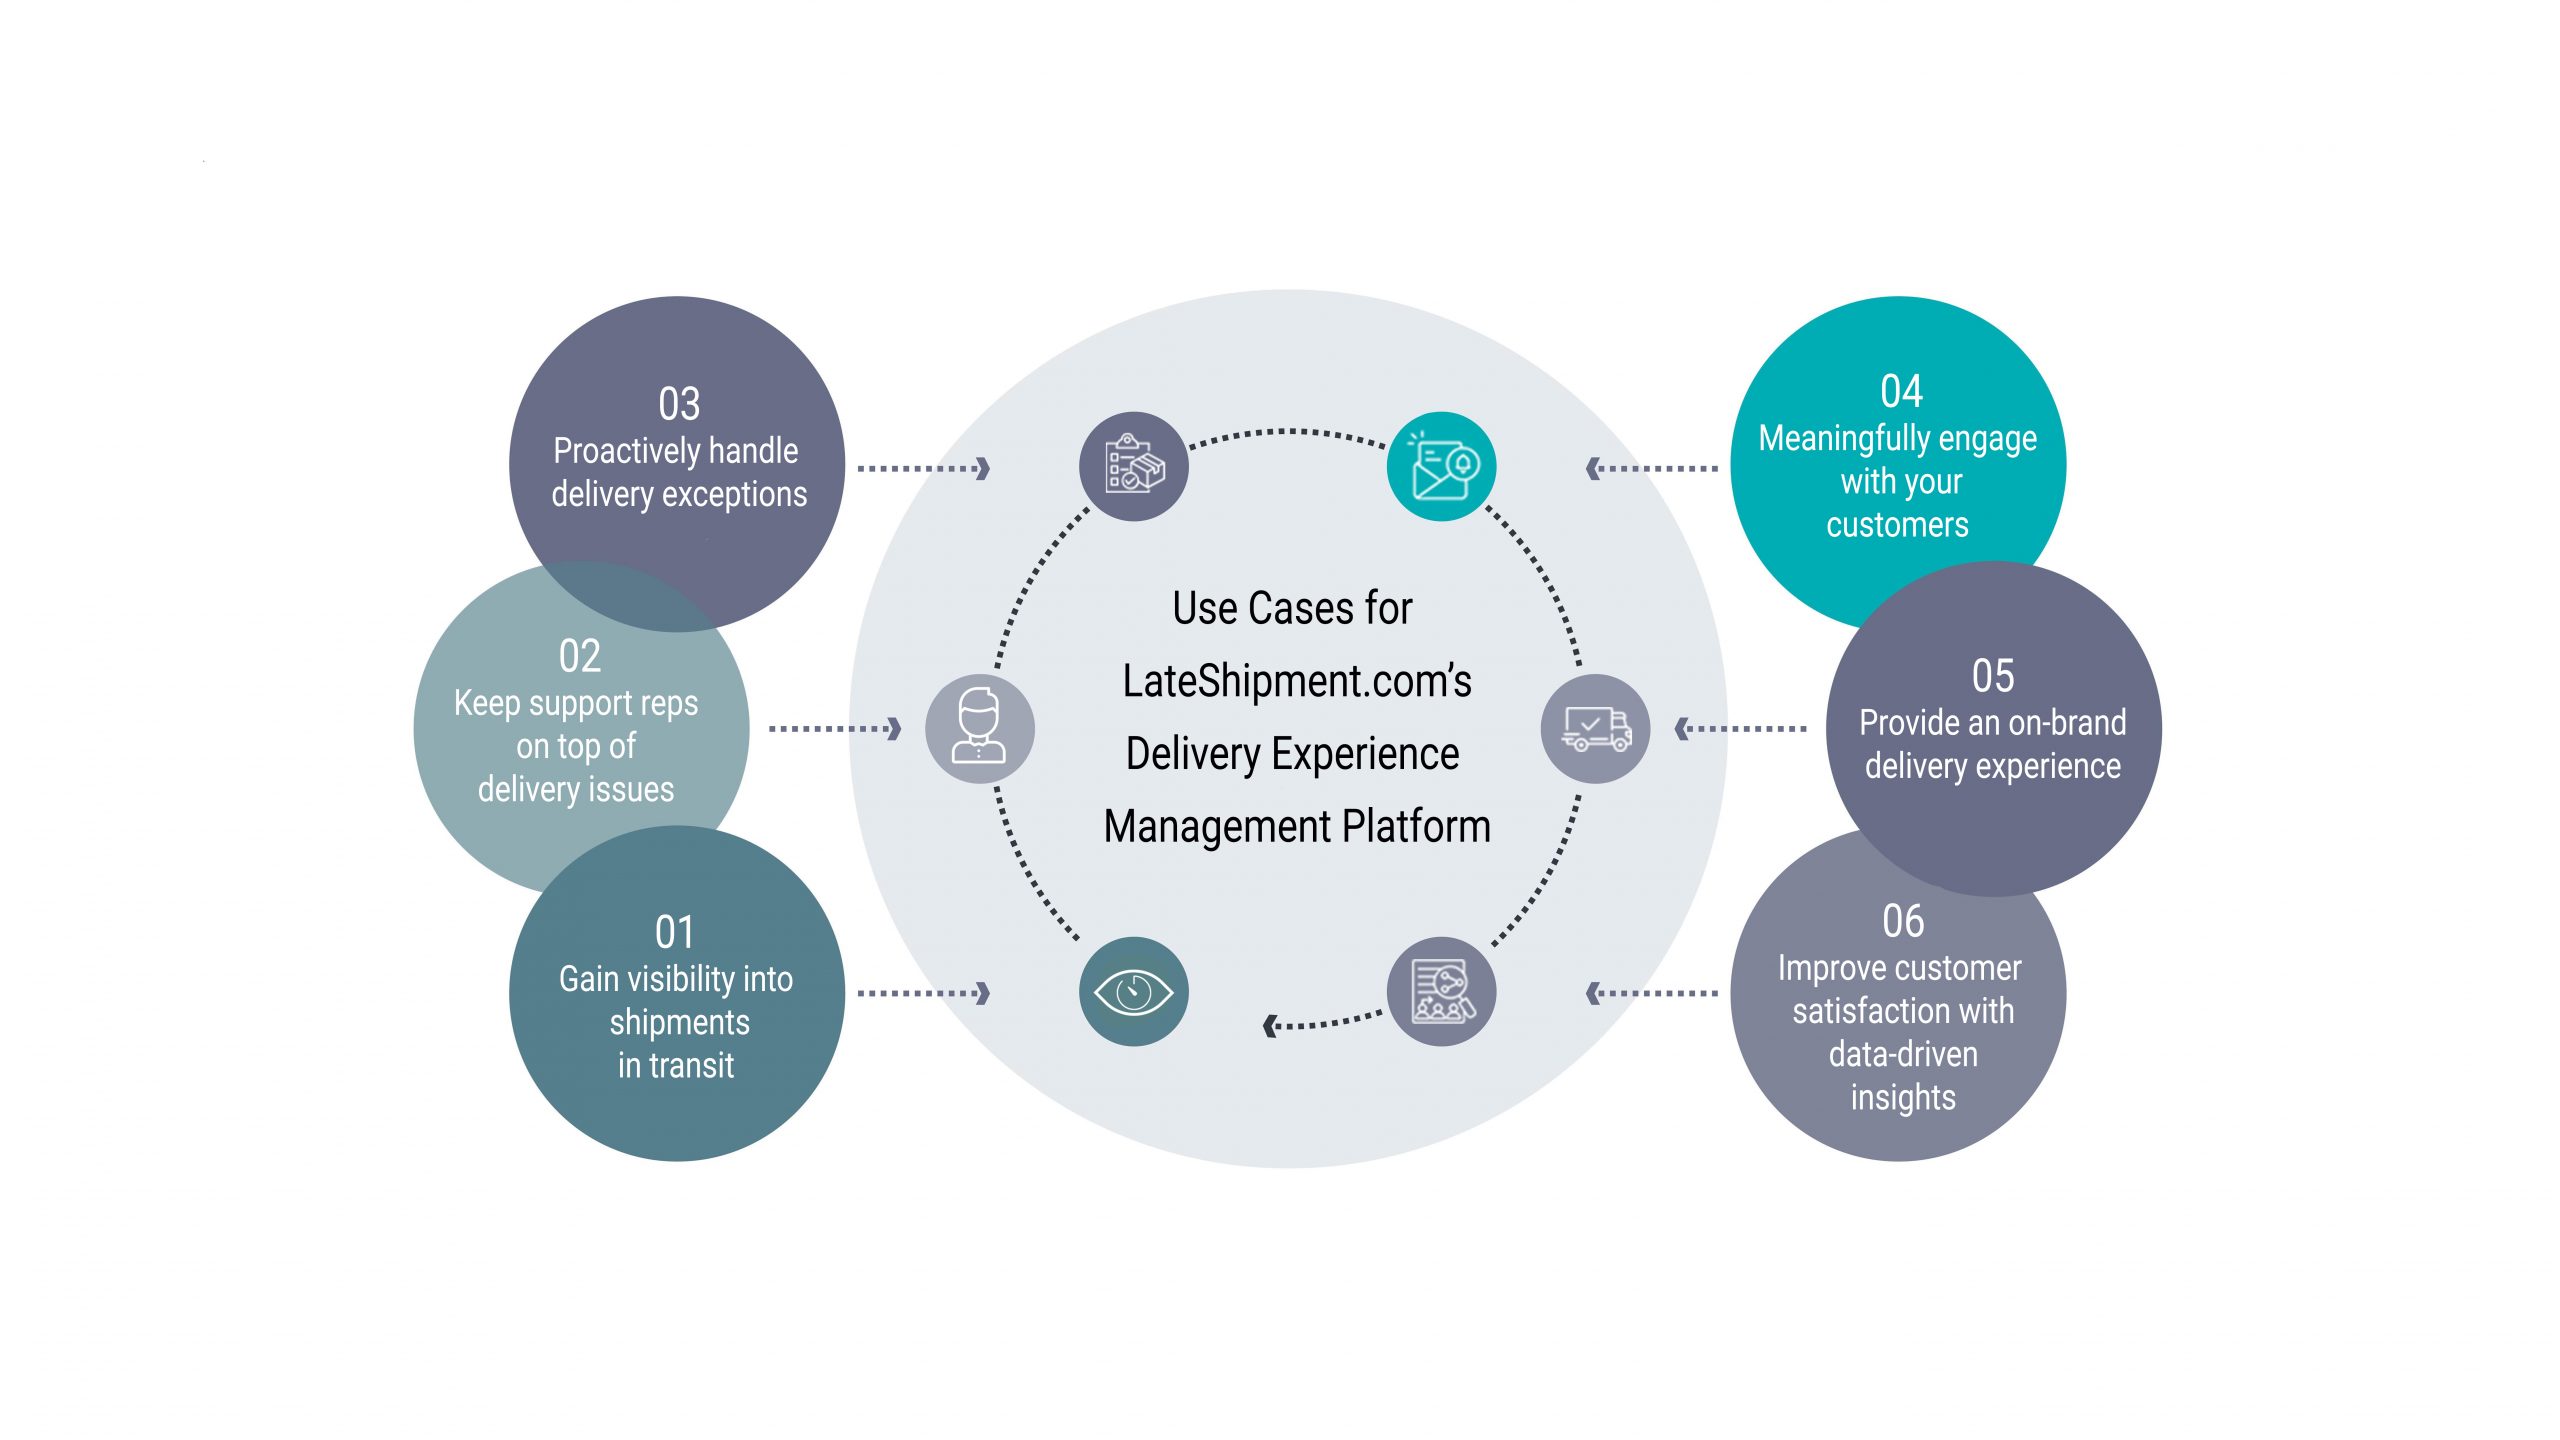 Use cases of LateShipment's Delivery Experience Management